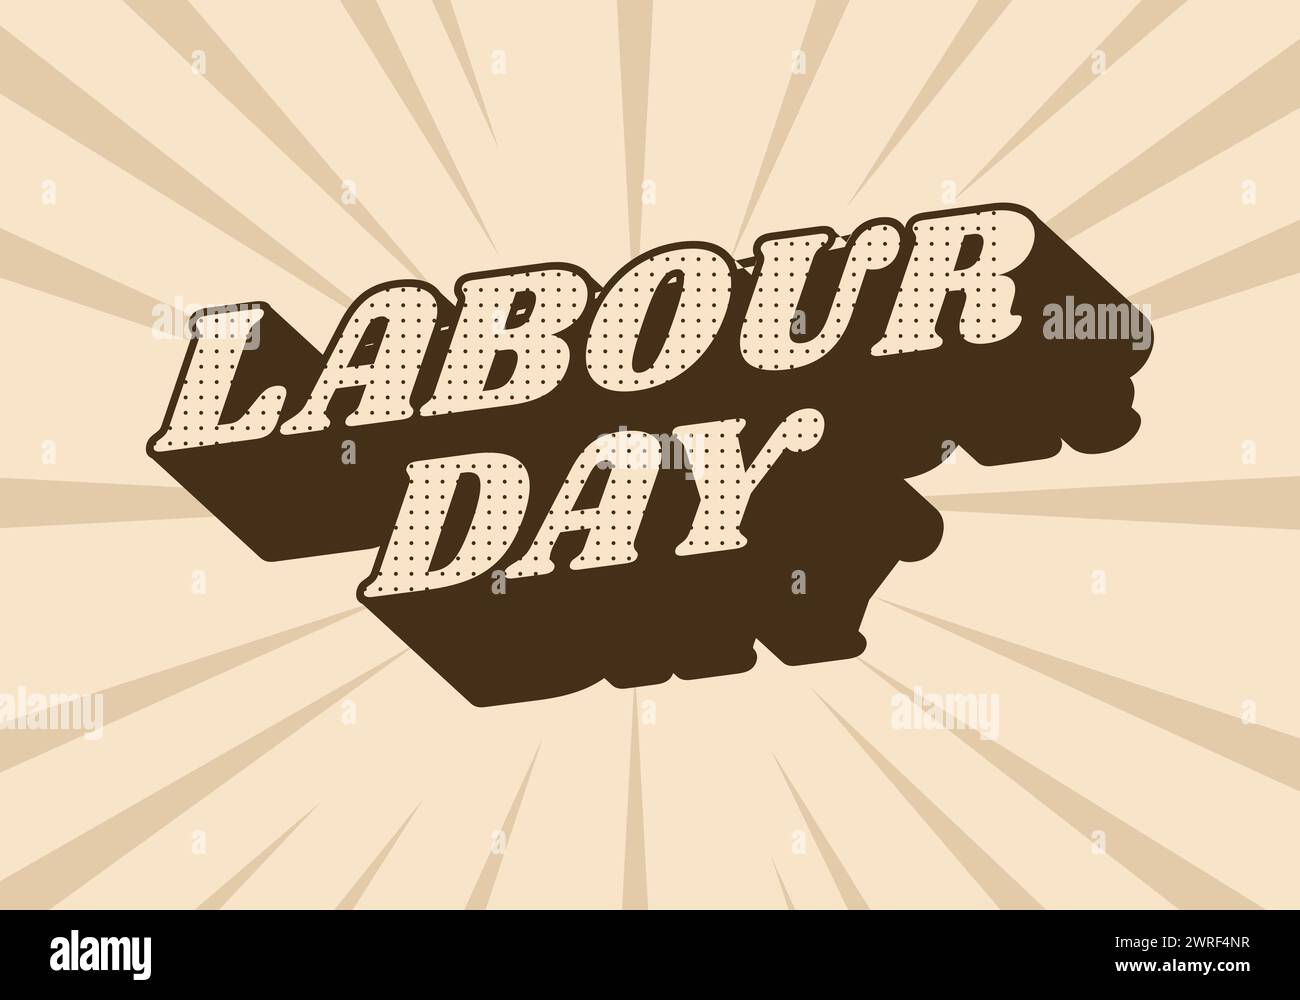 Labour day. Text effect design in vintage color with eye catching effect Stock Vector